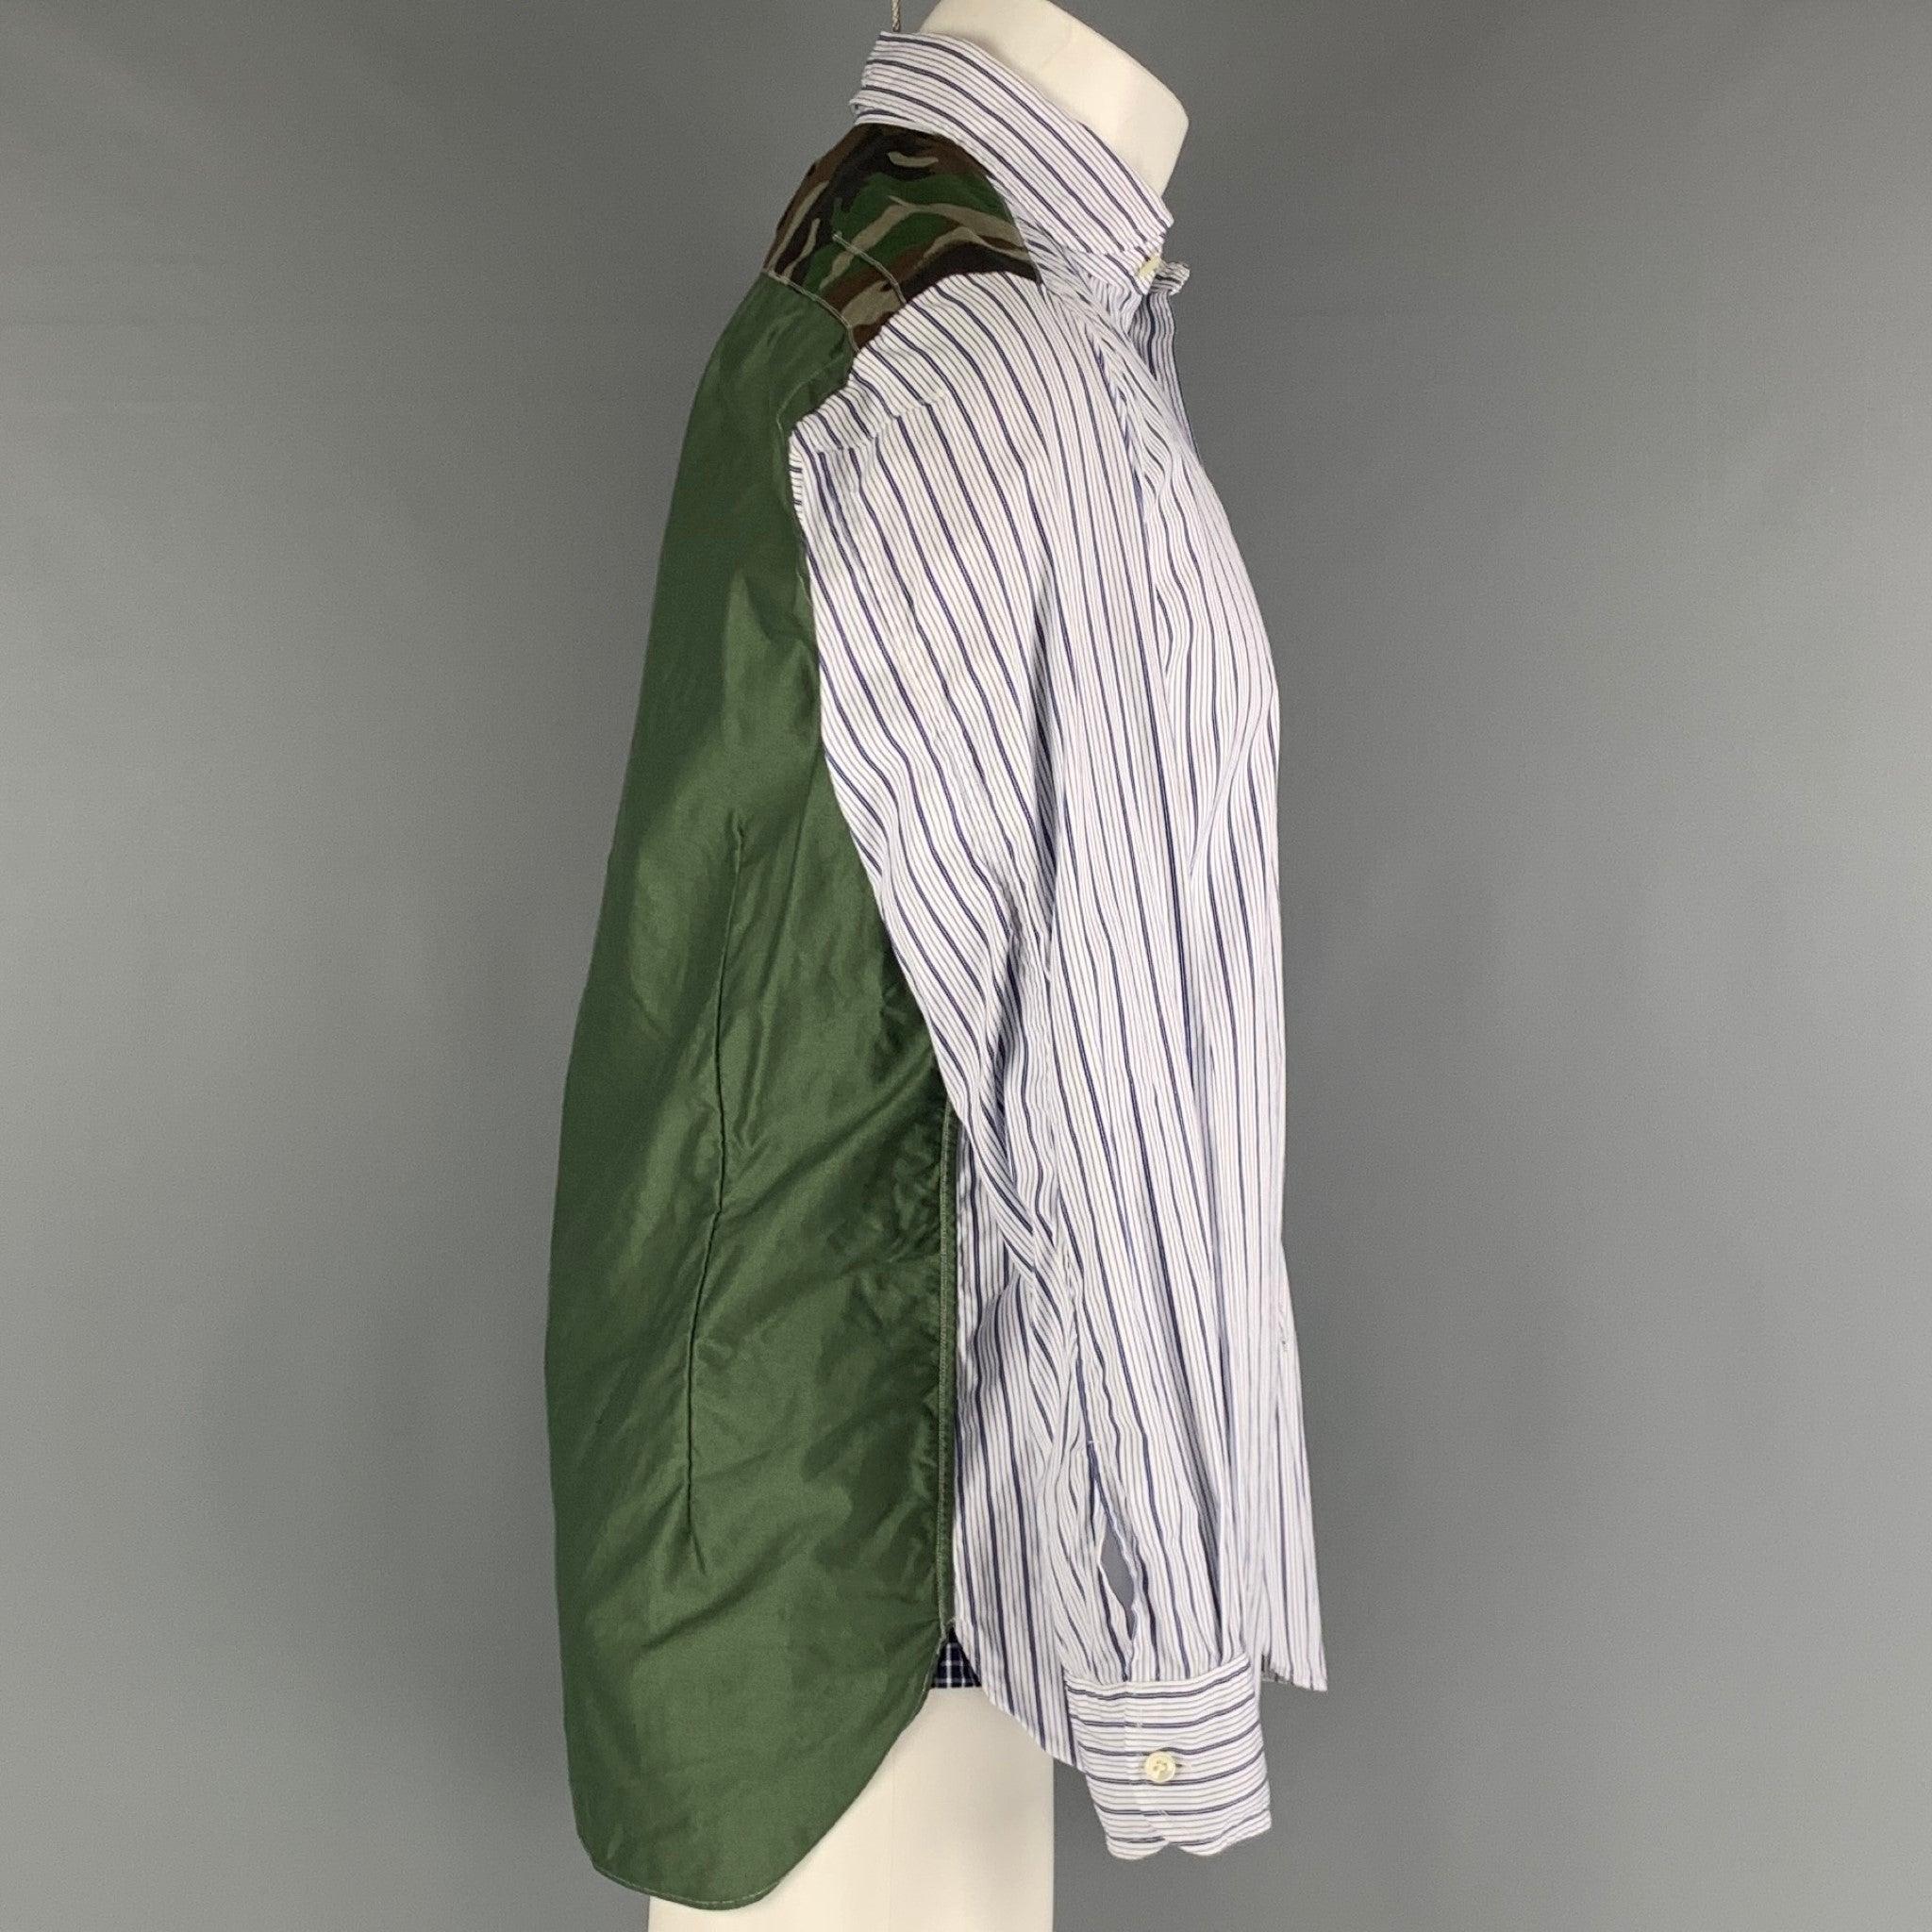 JUNYA WATANABE AD2018 long sleeve shirt comes in a navy and white striped cotton woven featuring camo yoke detail, cotton green woven material back panel, and a button up closure. Made in Japan.Excellent Pre-Owned Condition.  

Marked:   M